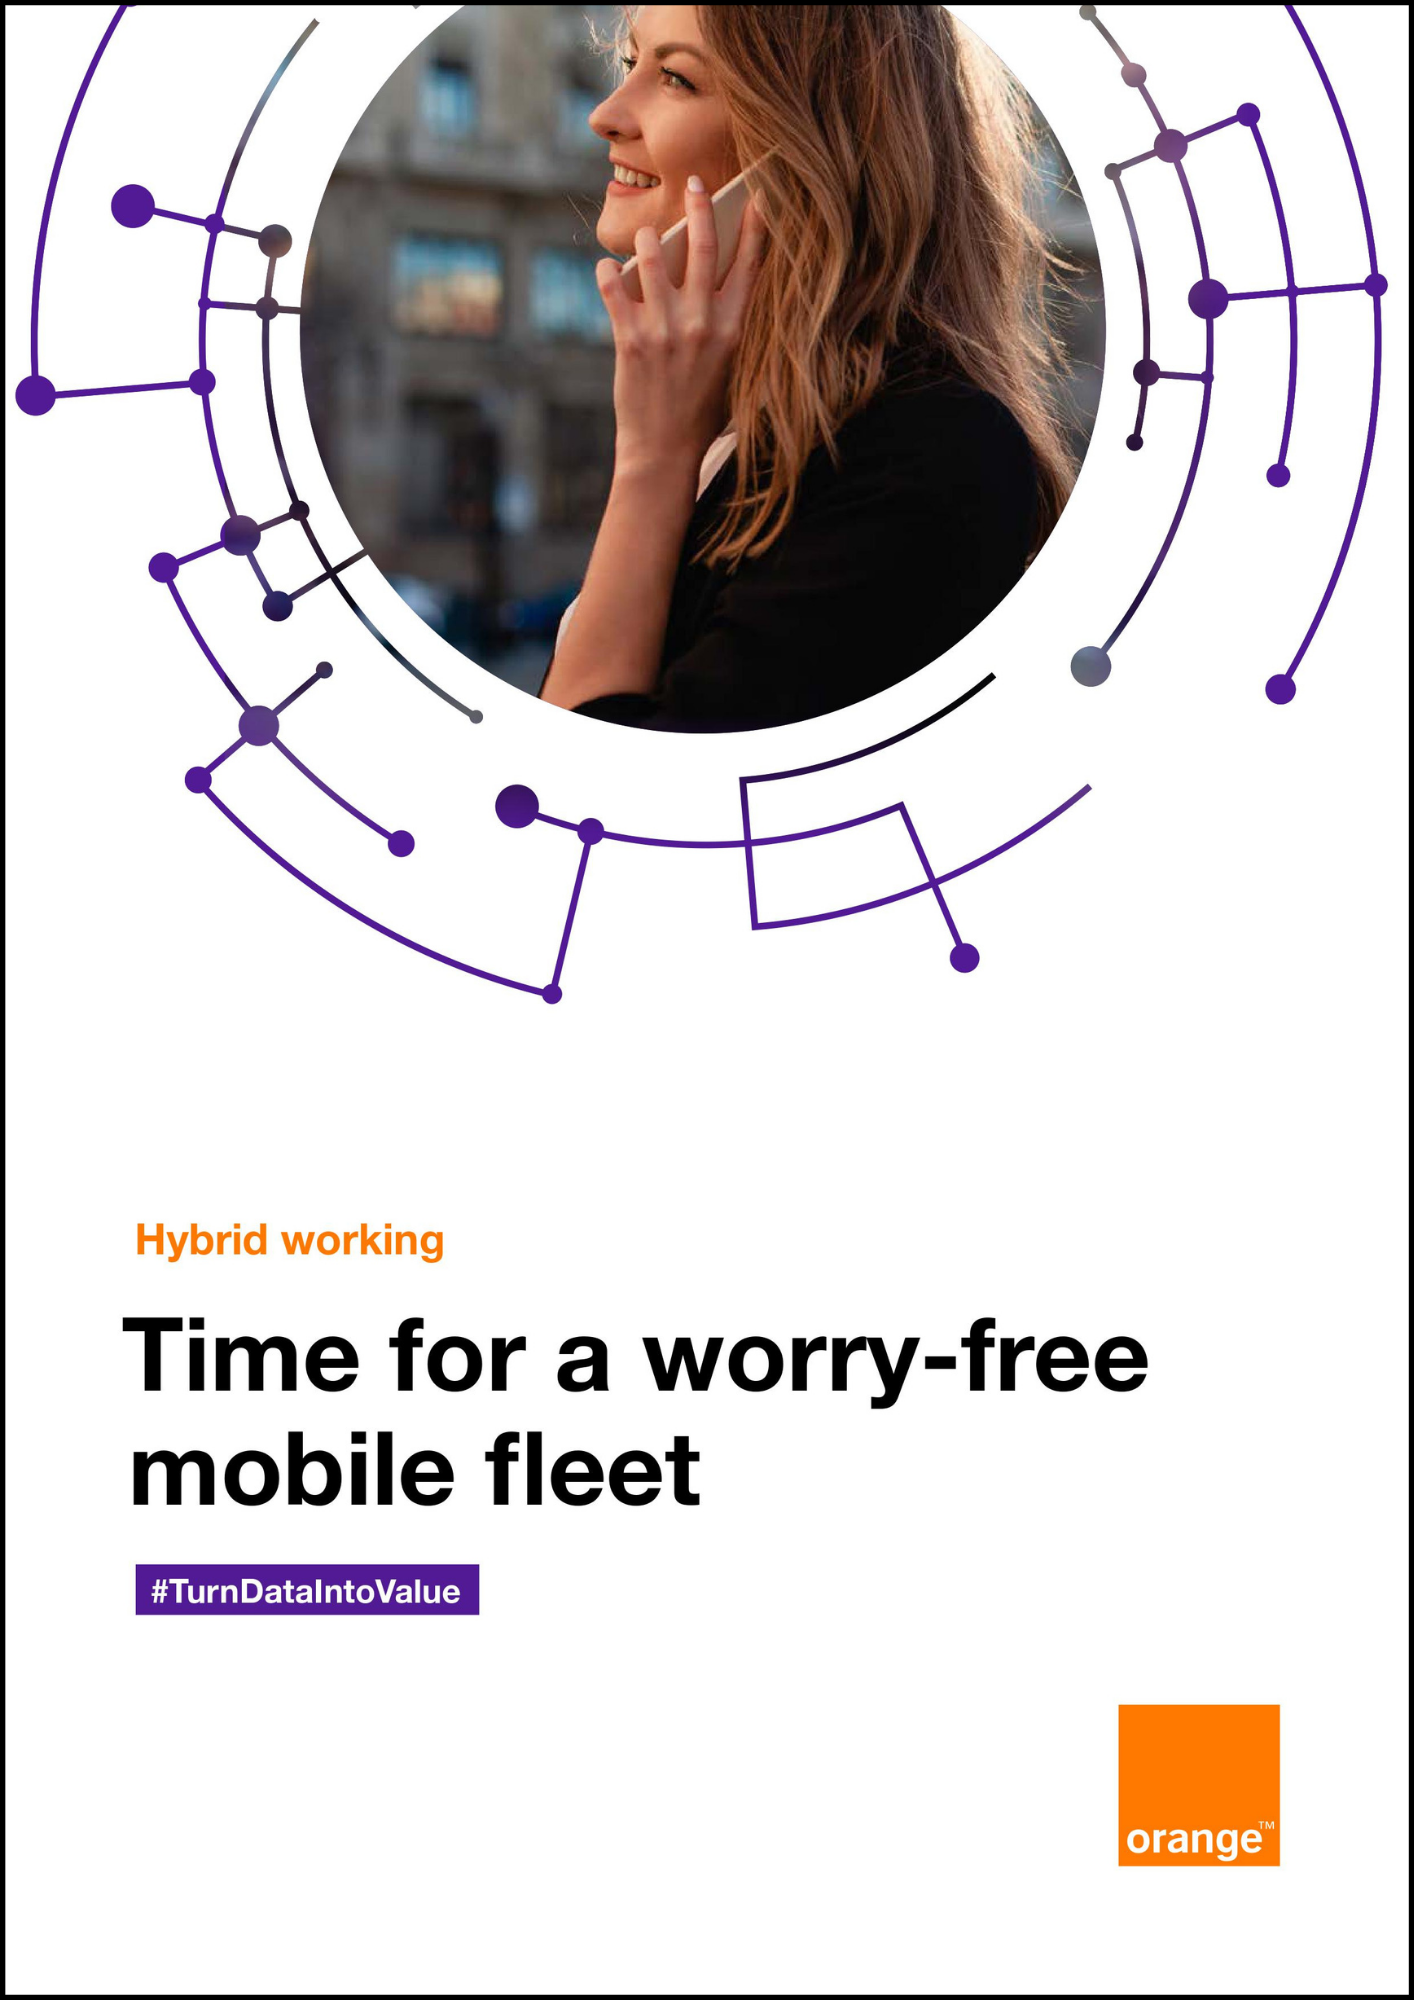 It's Time For A Worry-Free Mobile Fleet, Download Our Free Whitepaper To Get Started